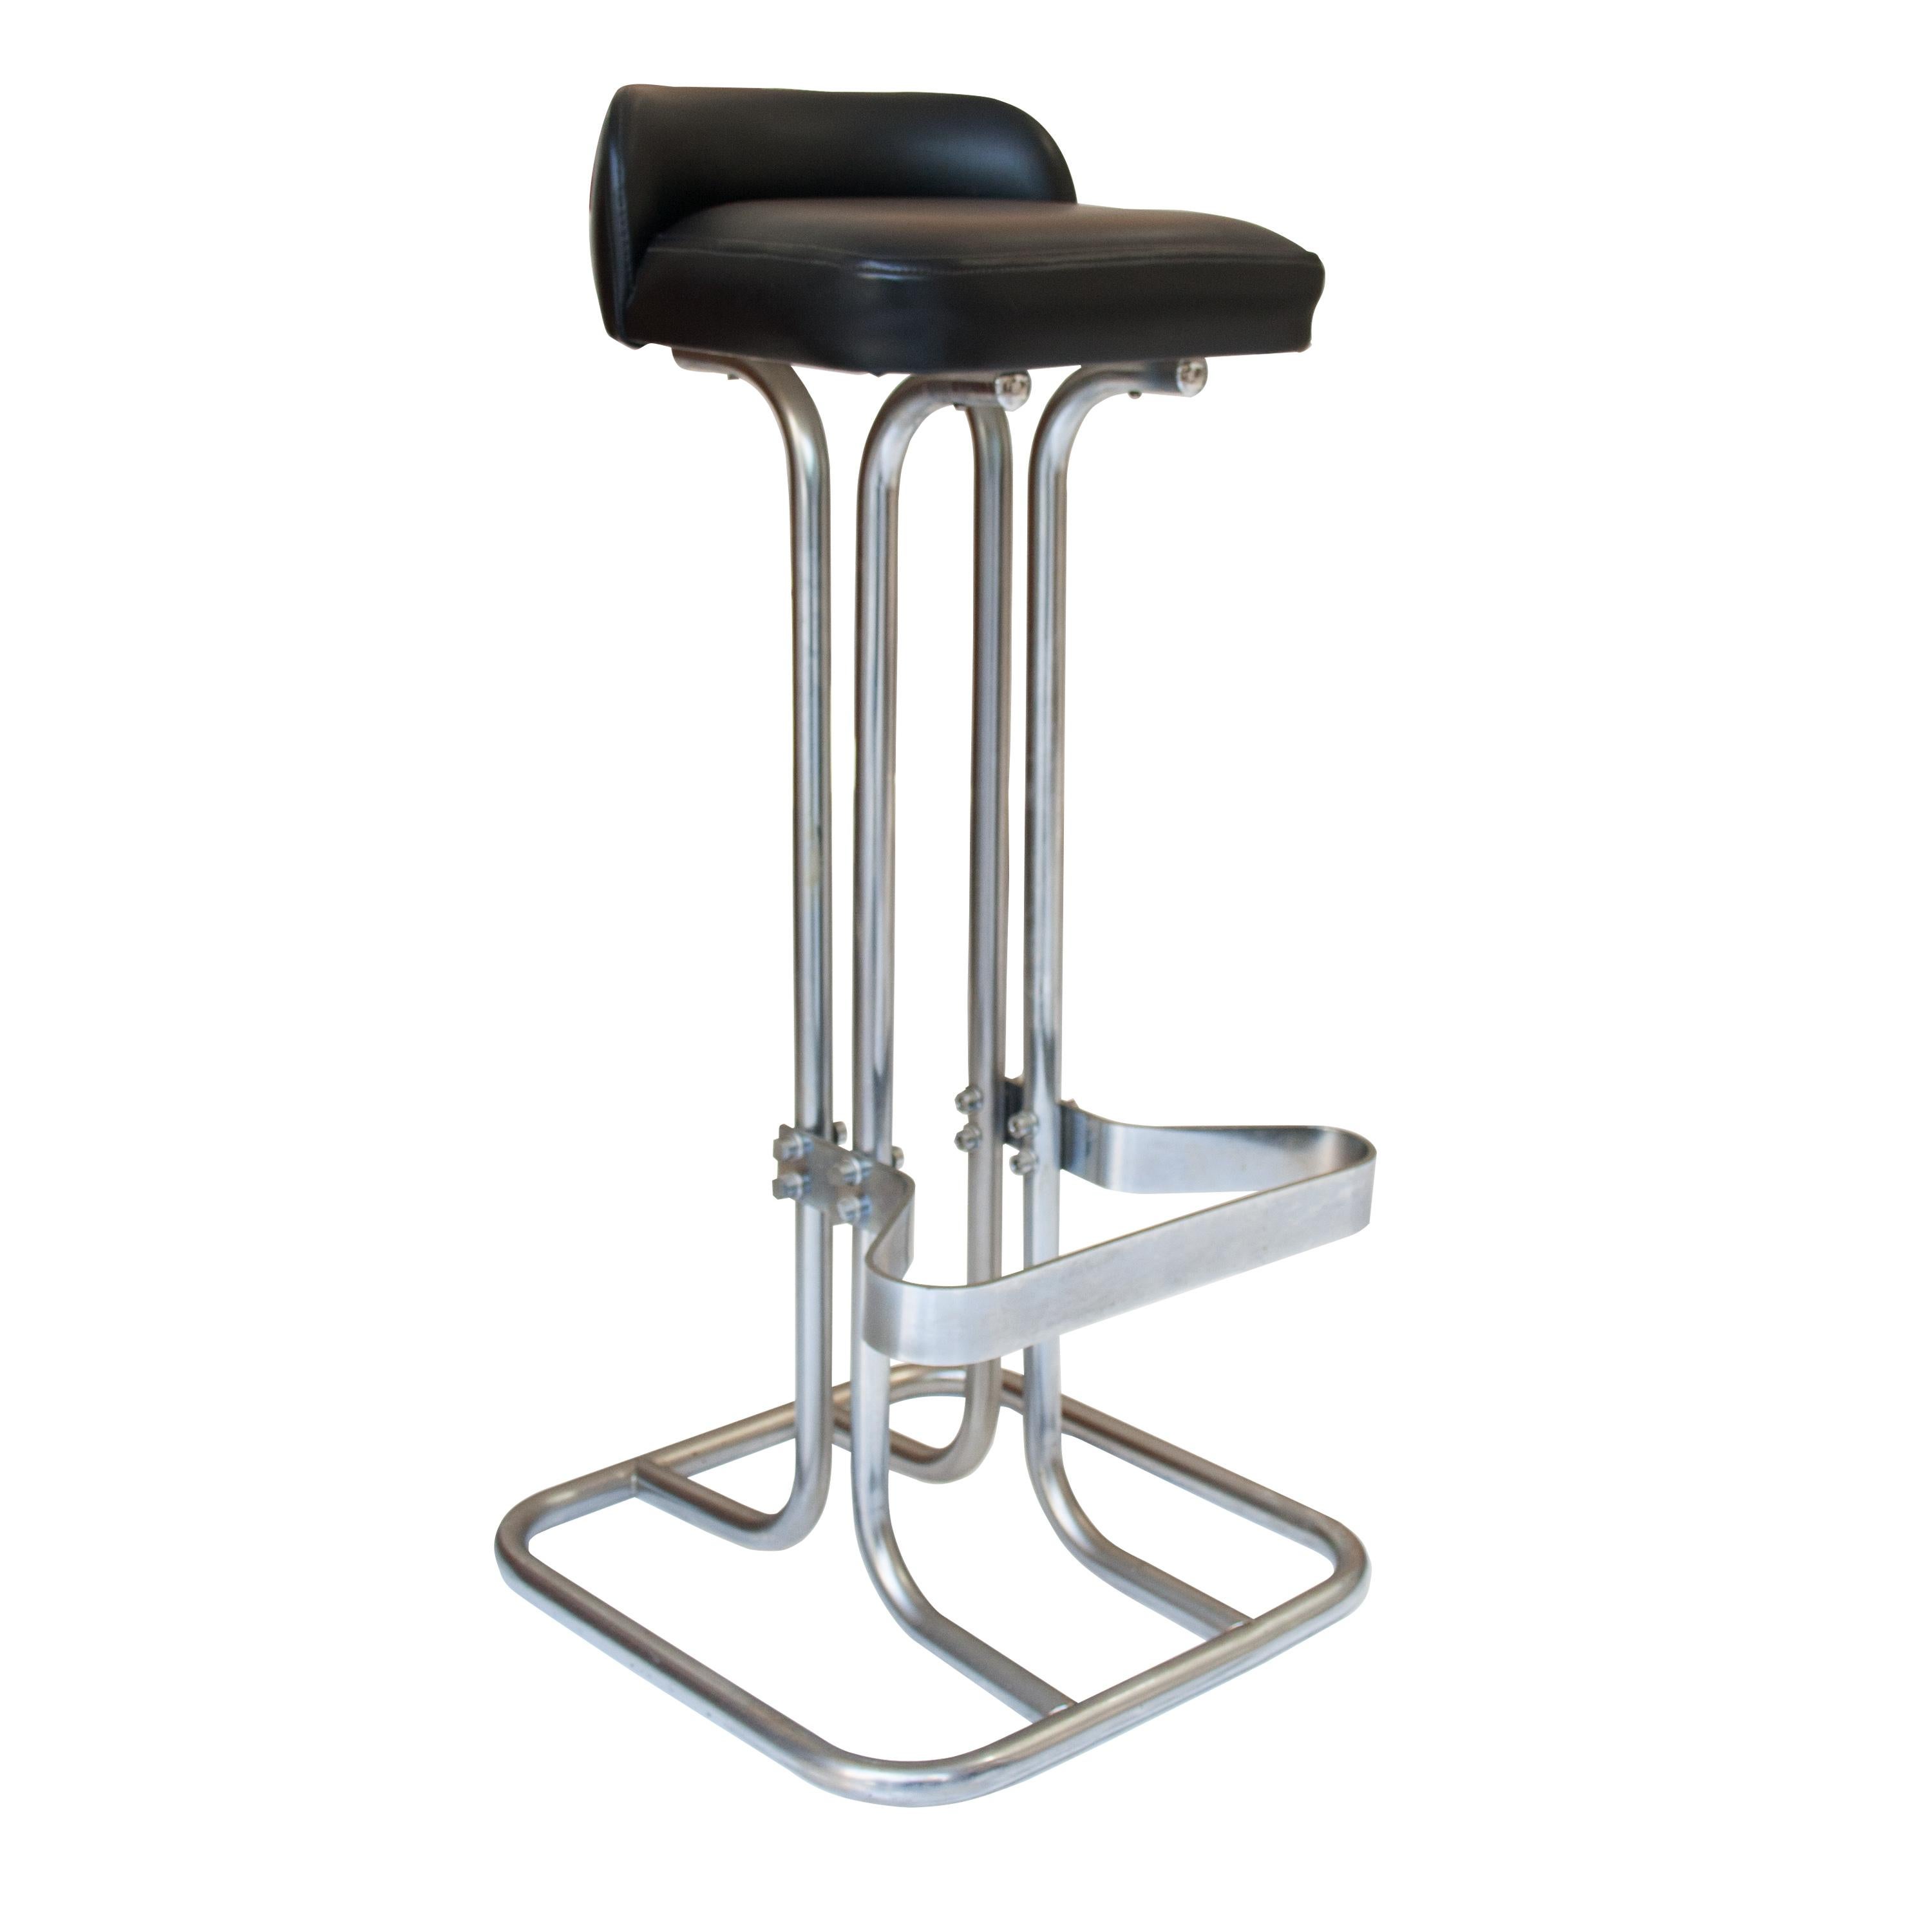 Pair of Italian bar stools. Chromed steel tubular structure with black leather upholstered seating.
 